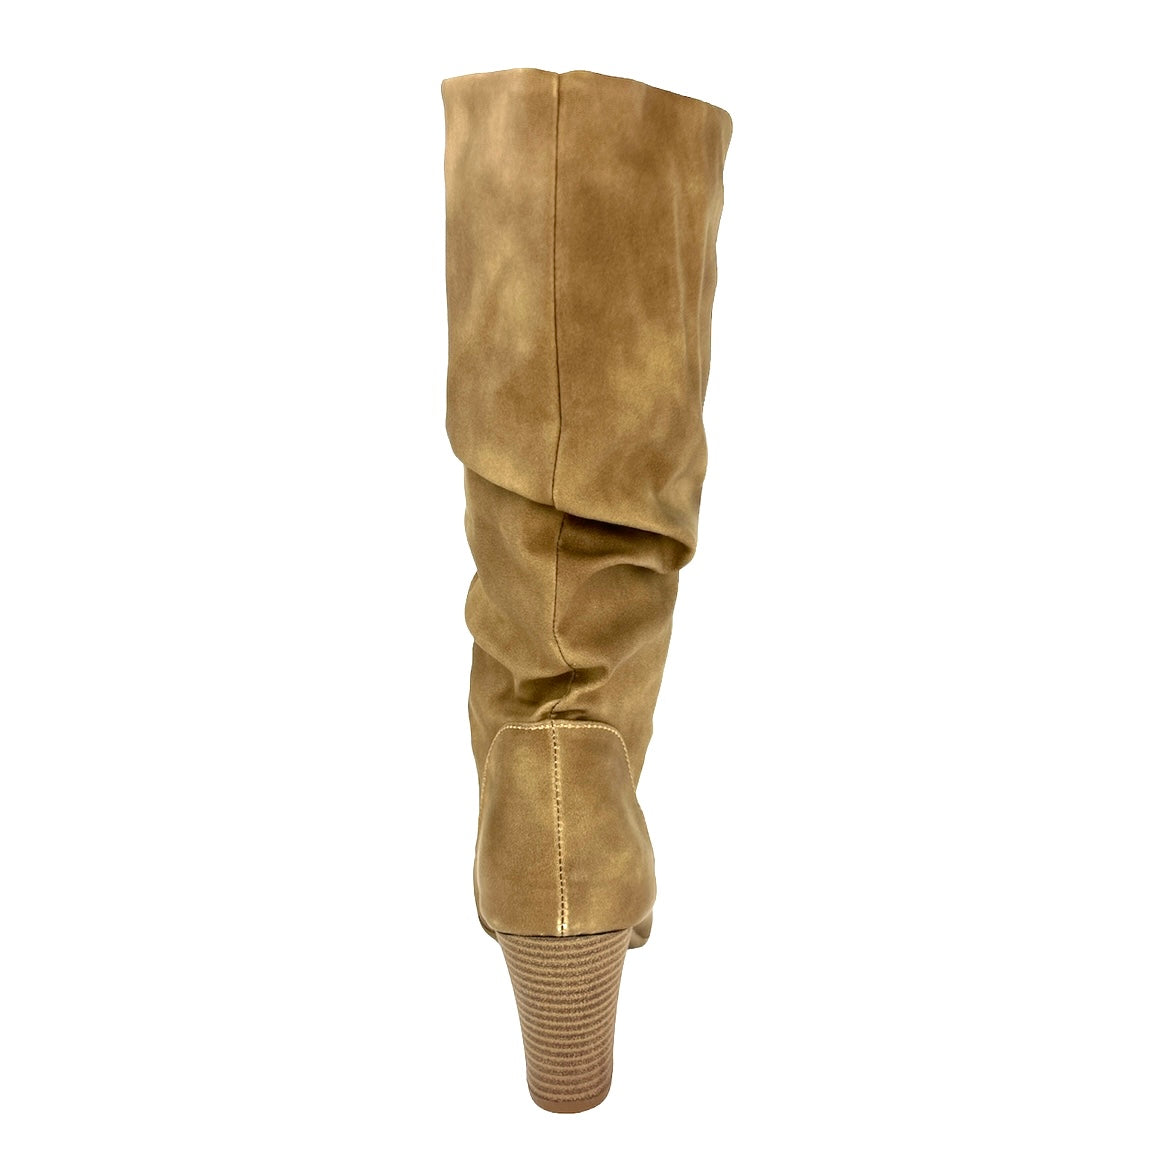 STRASBURG Western Tall Riding Boots Tan Size 10 Women's Shoes